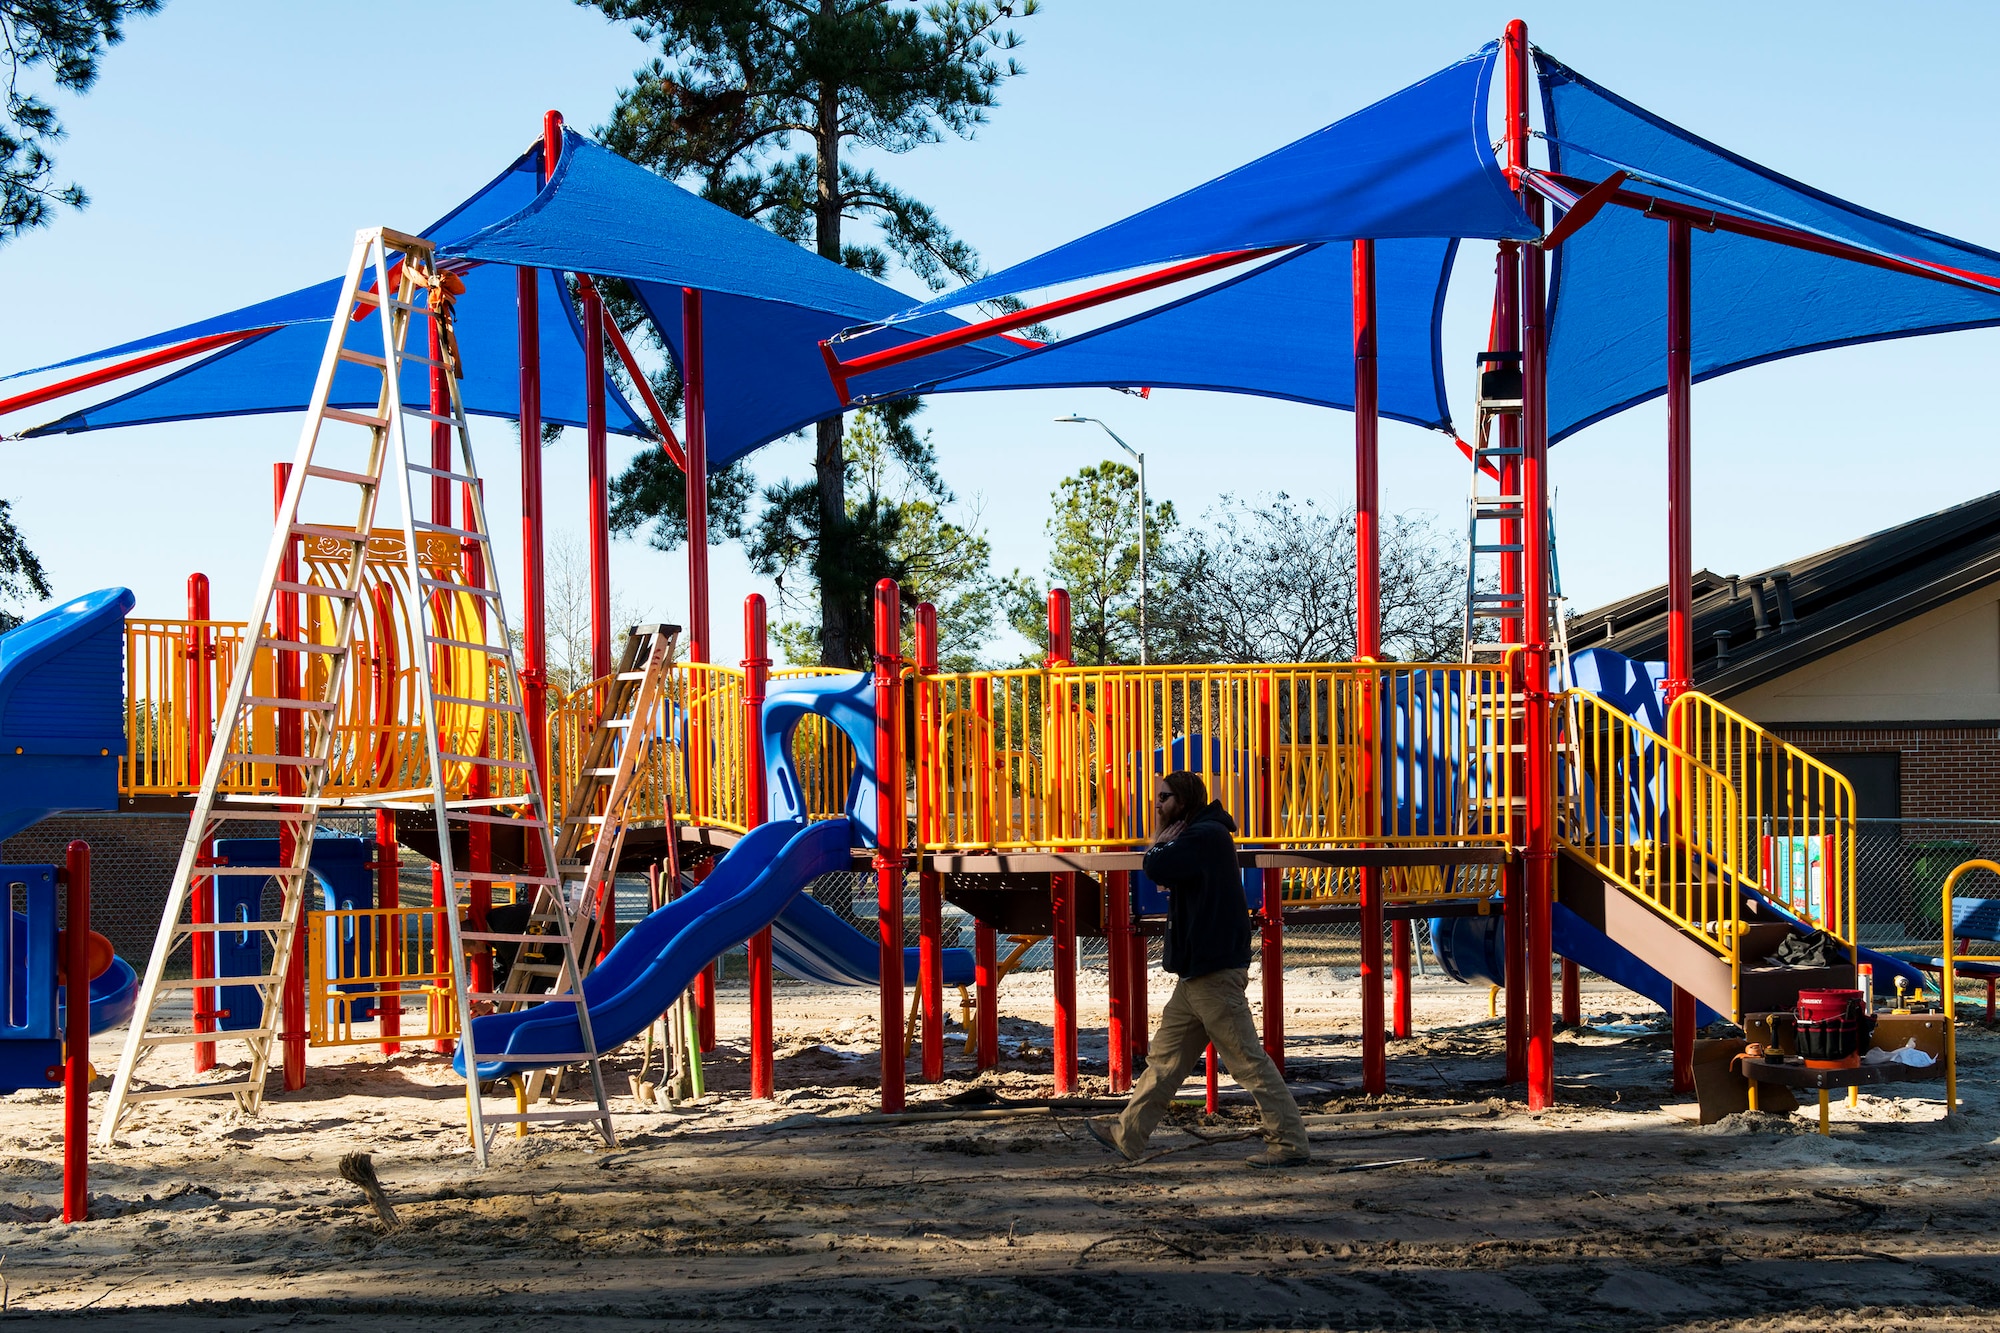 Professional playground installers construct a new playground, Jan. 4, 2018, at Moody Air Force Base, Ga. The 23d Force Support Squadron rebuilt and designed the new playground to improve quality of life and safety for Team Moody families. (U.S. Air Force photo by Airman 1st Class Erick Requadt)